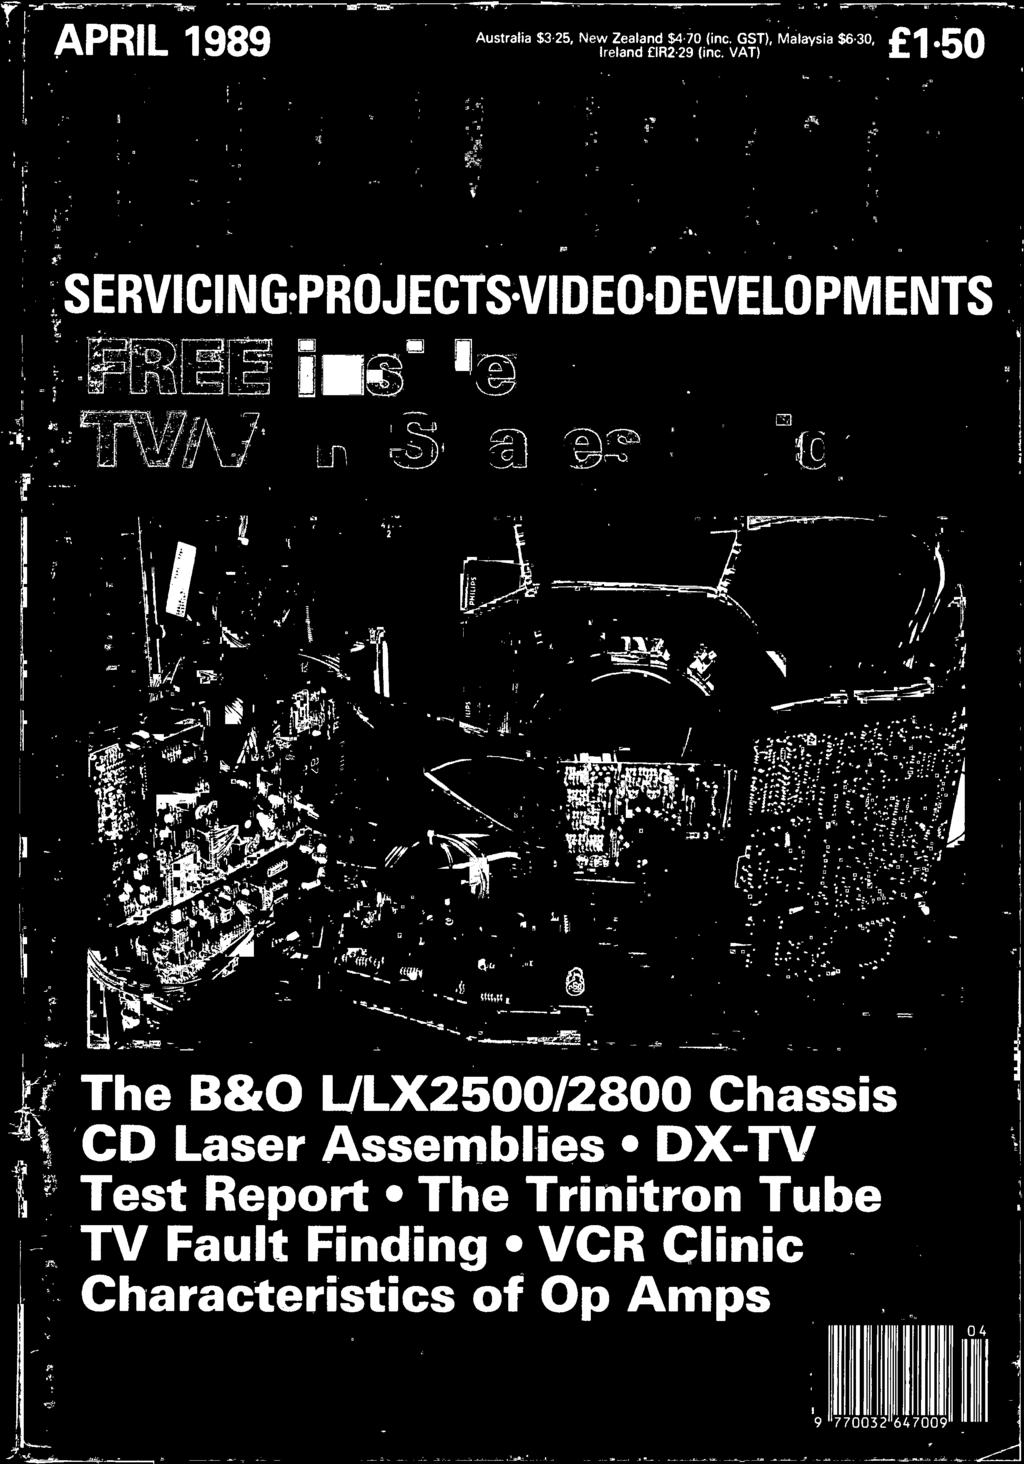 ULX2500/2800 Chassis CD Laser Assemblies DX -TV